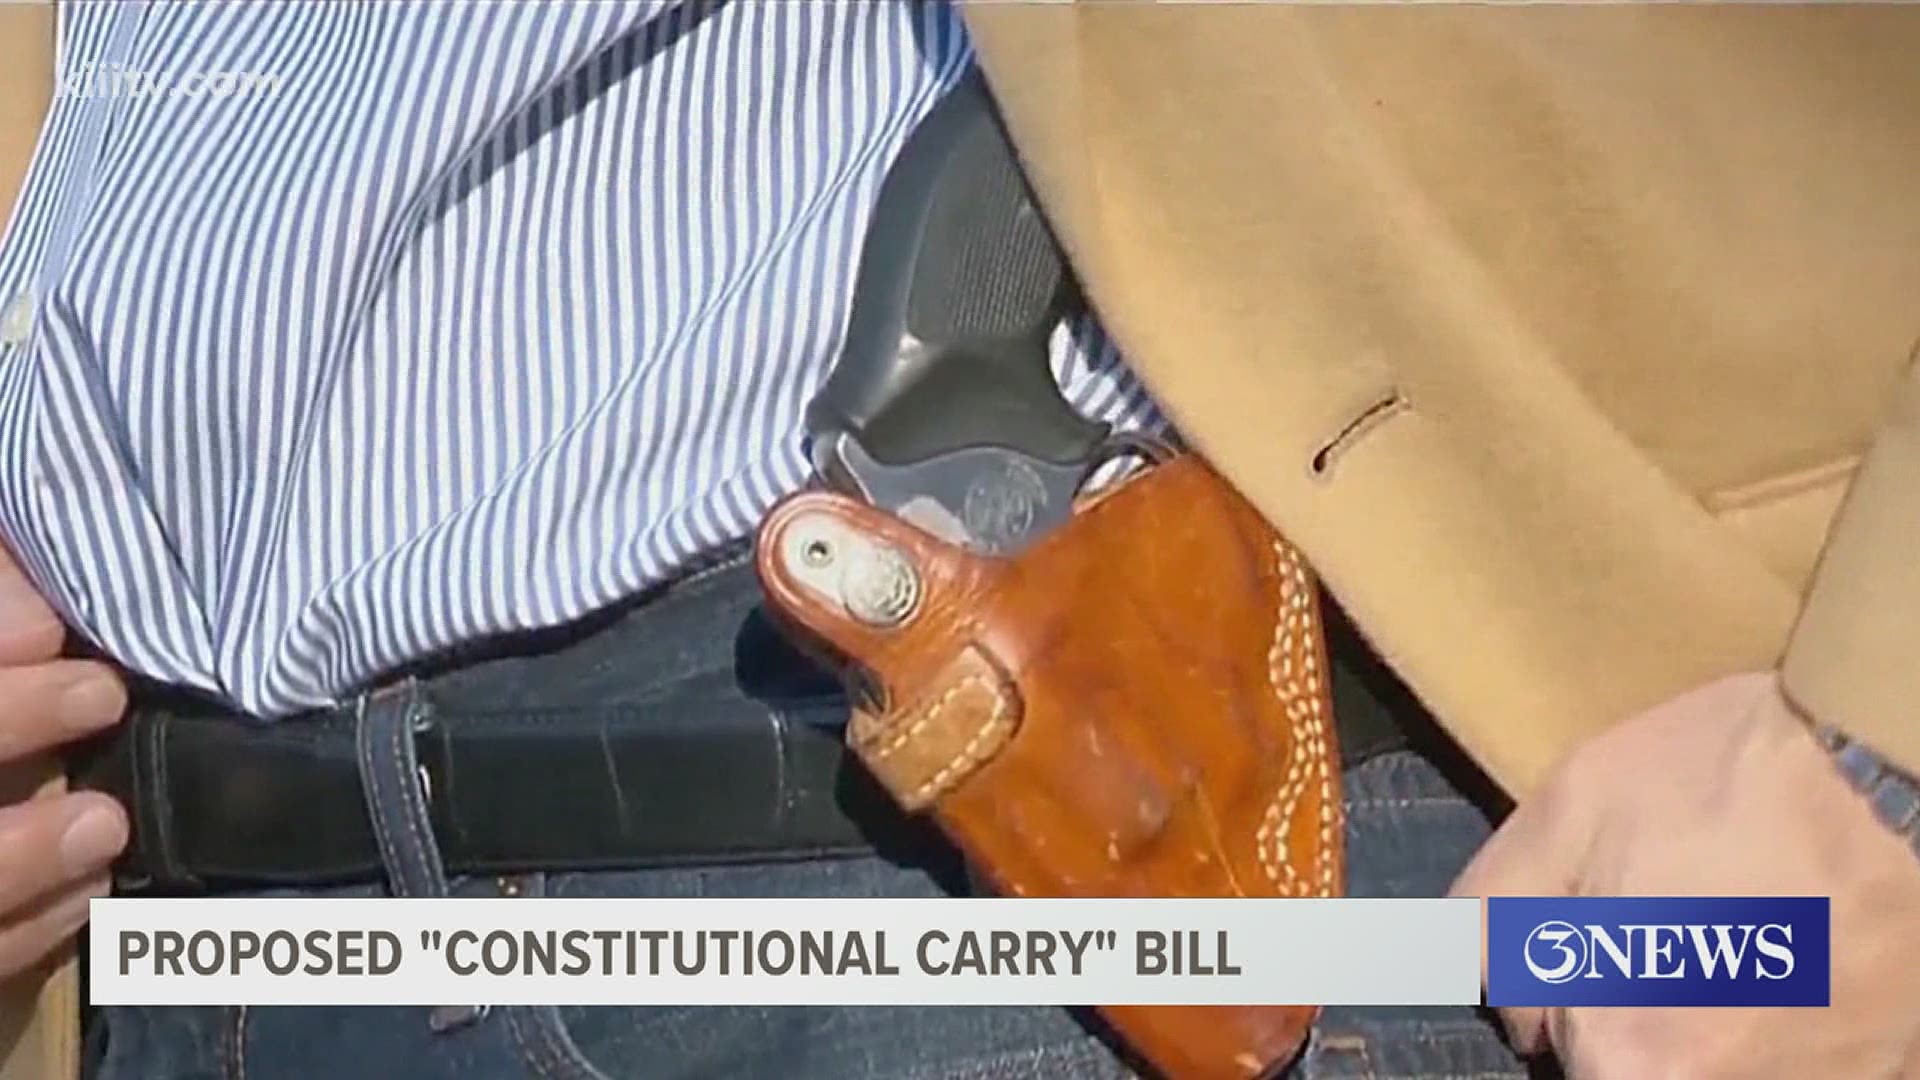 It’s expected that our state senators will debate the merits of allowing people to carry a concealed weapon without a permit.